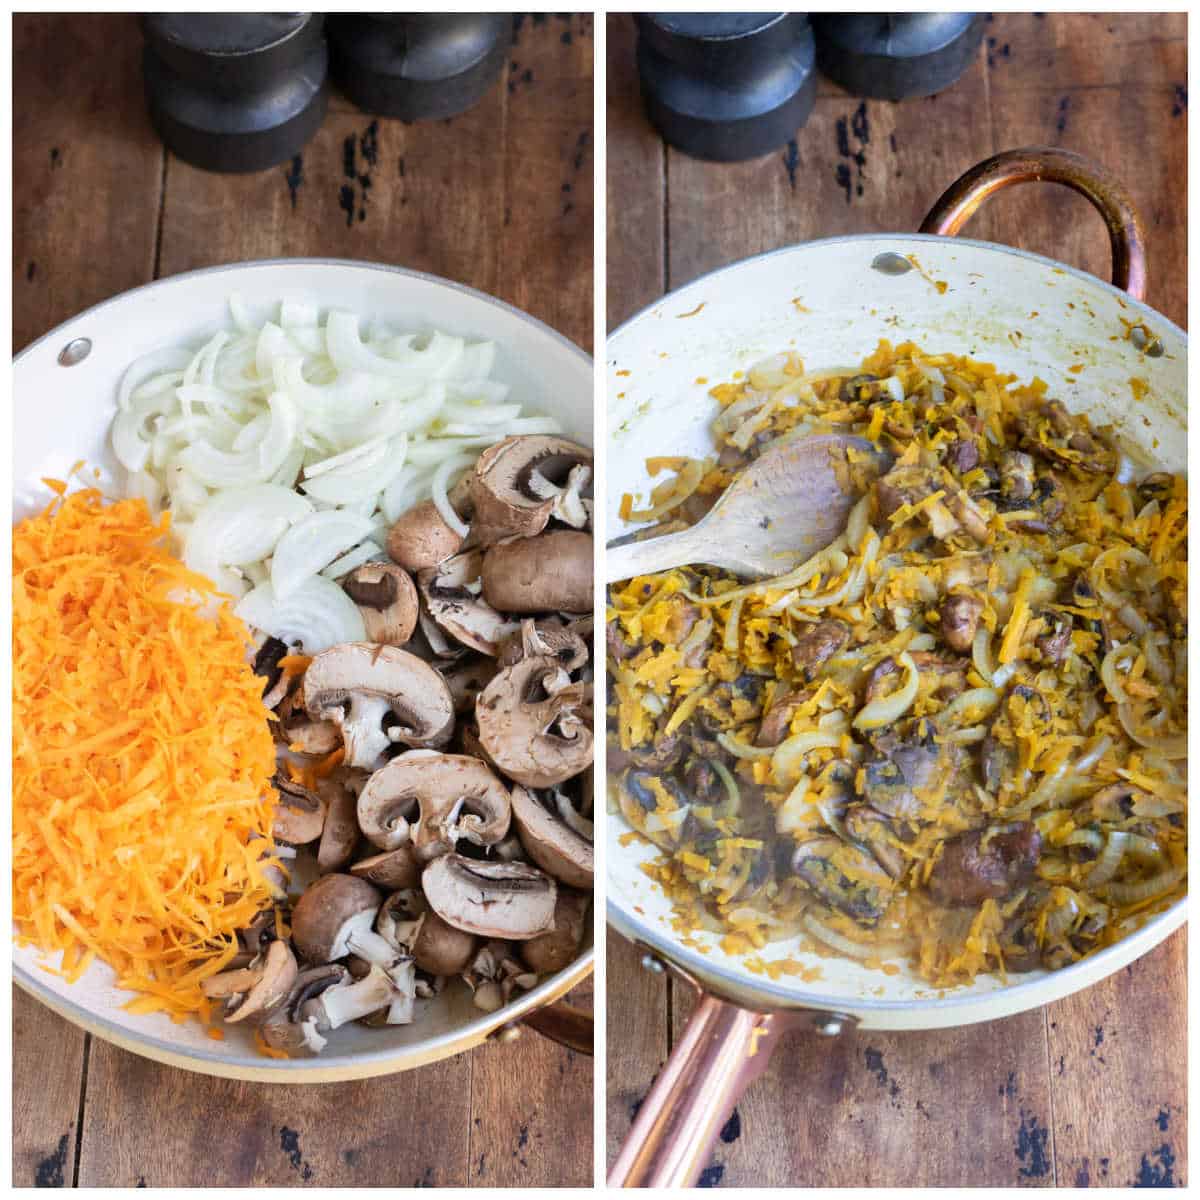 Onions, mushrooms and butternut squash in a pan.